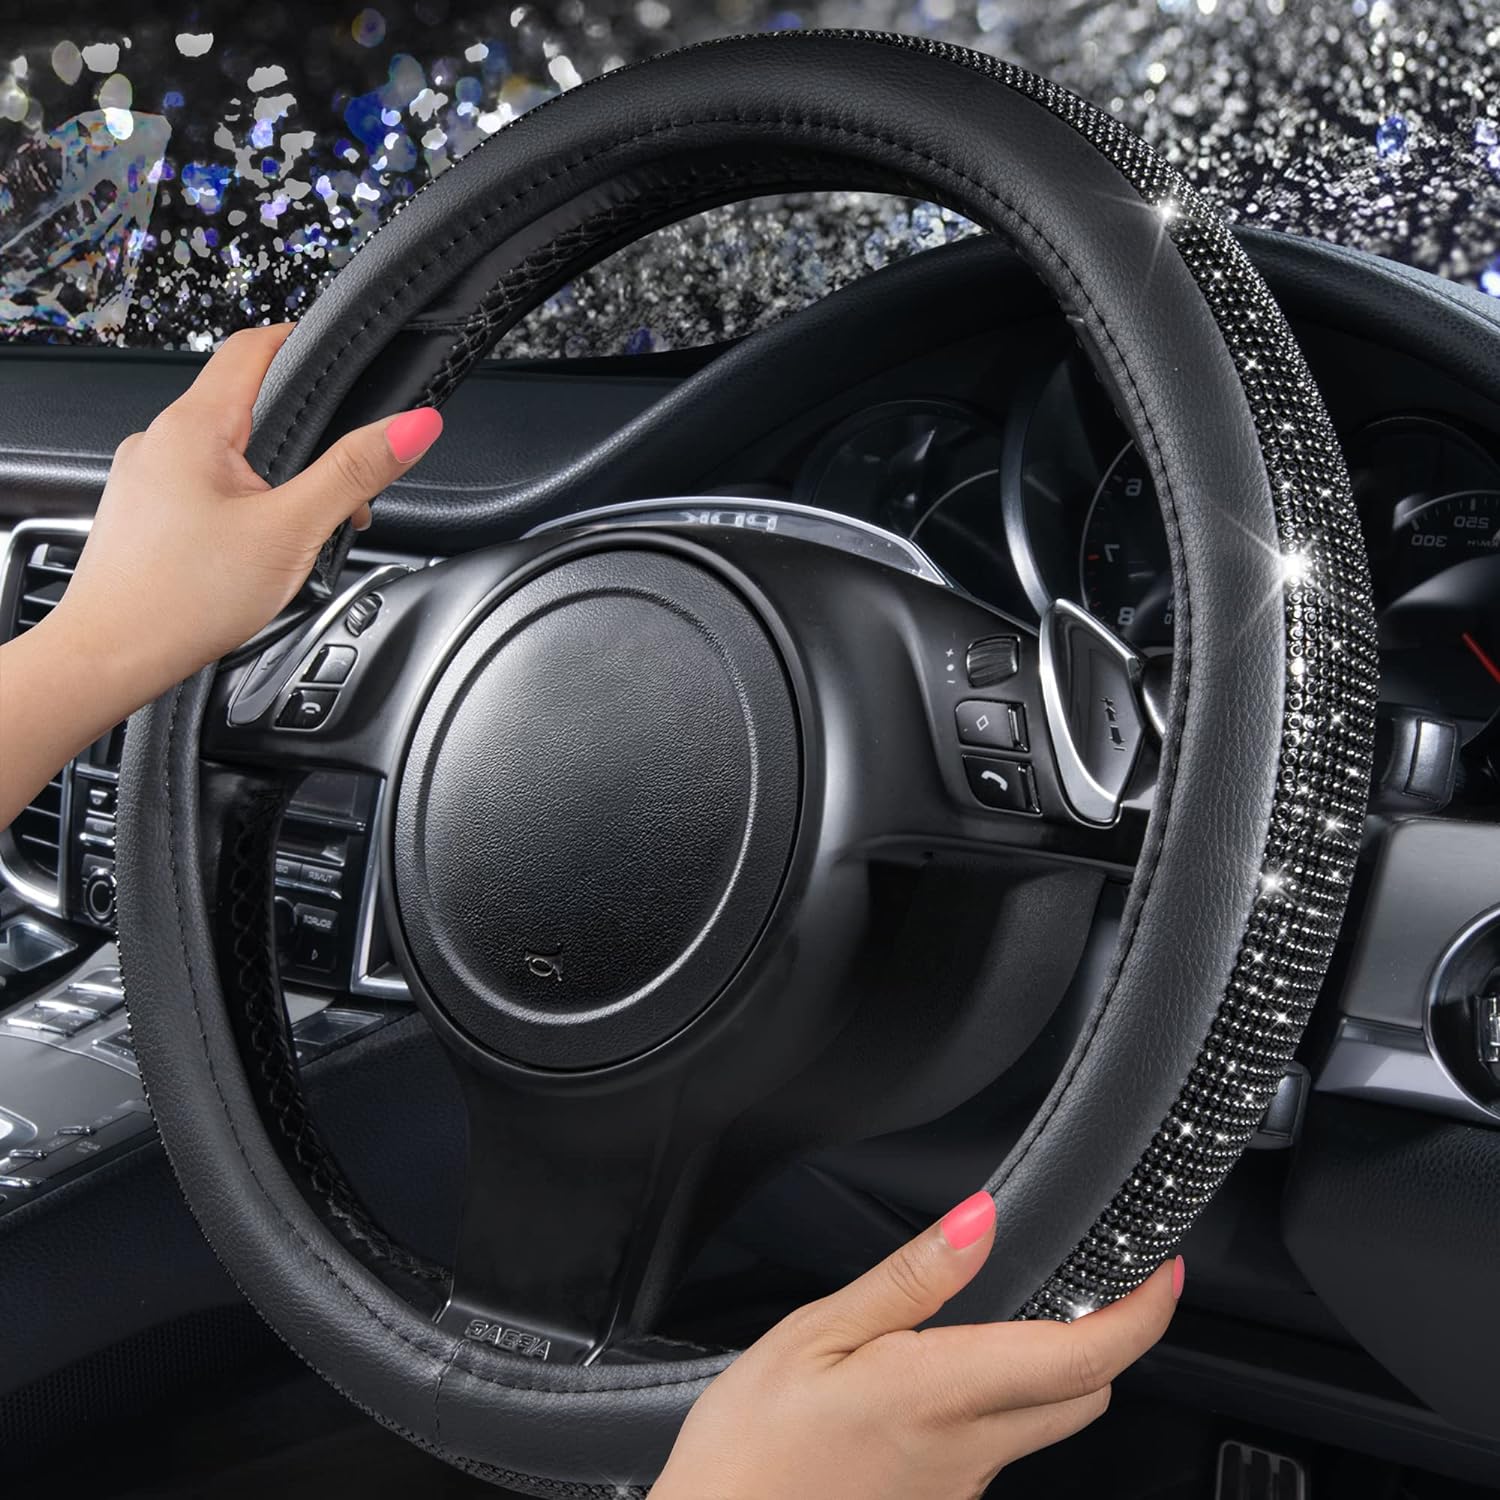 CAR PASS Bling Diamond Leather Steering Wheel Cover&Bling Car Seat Covers, Shining Rhinestone Diamond Waterproof Faux Leather Two Front Only Universal Fit 95% Automotive Glitter Crystal Sparkle Strips